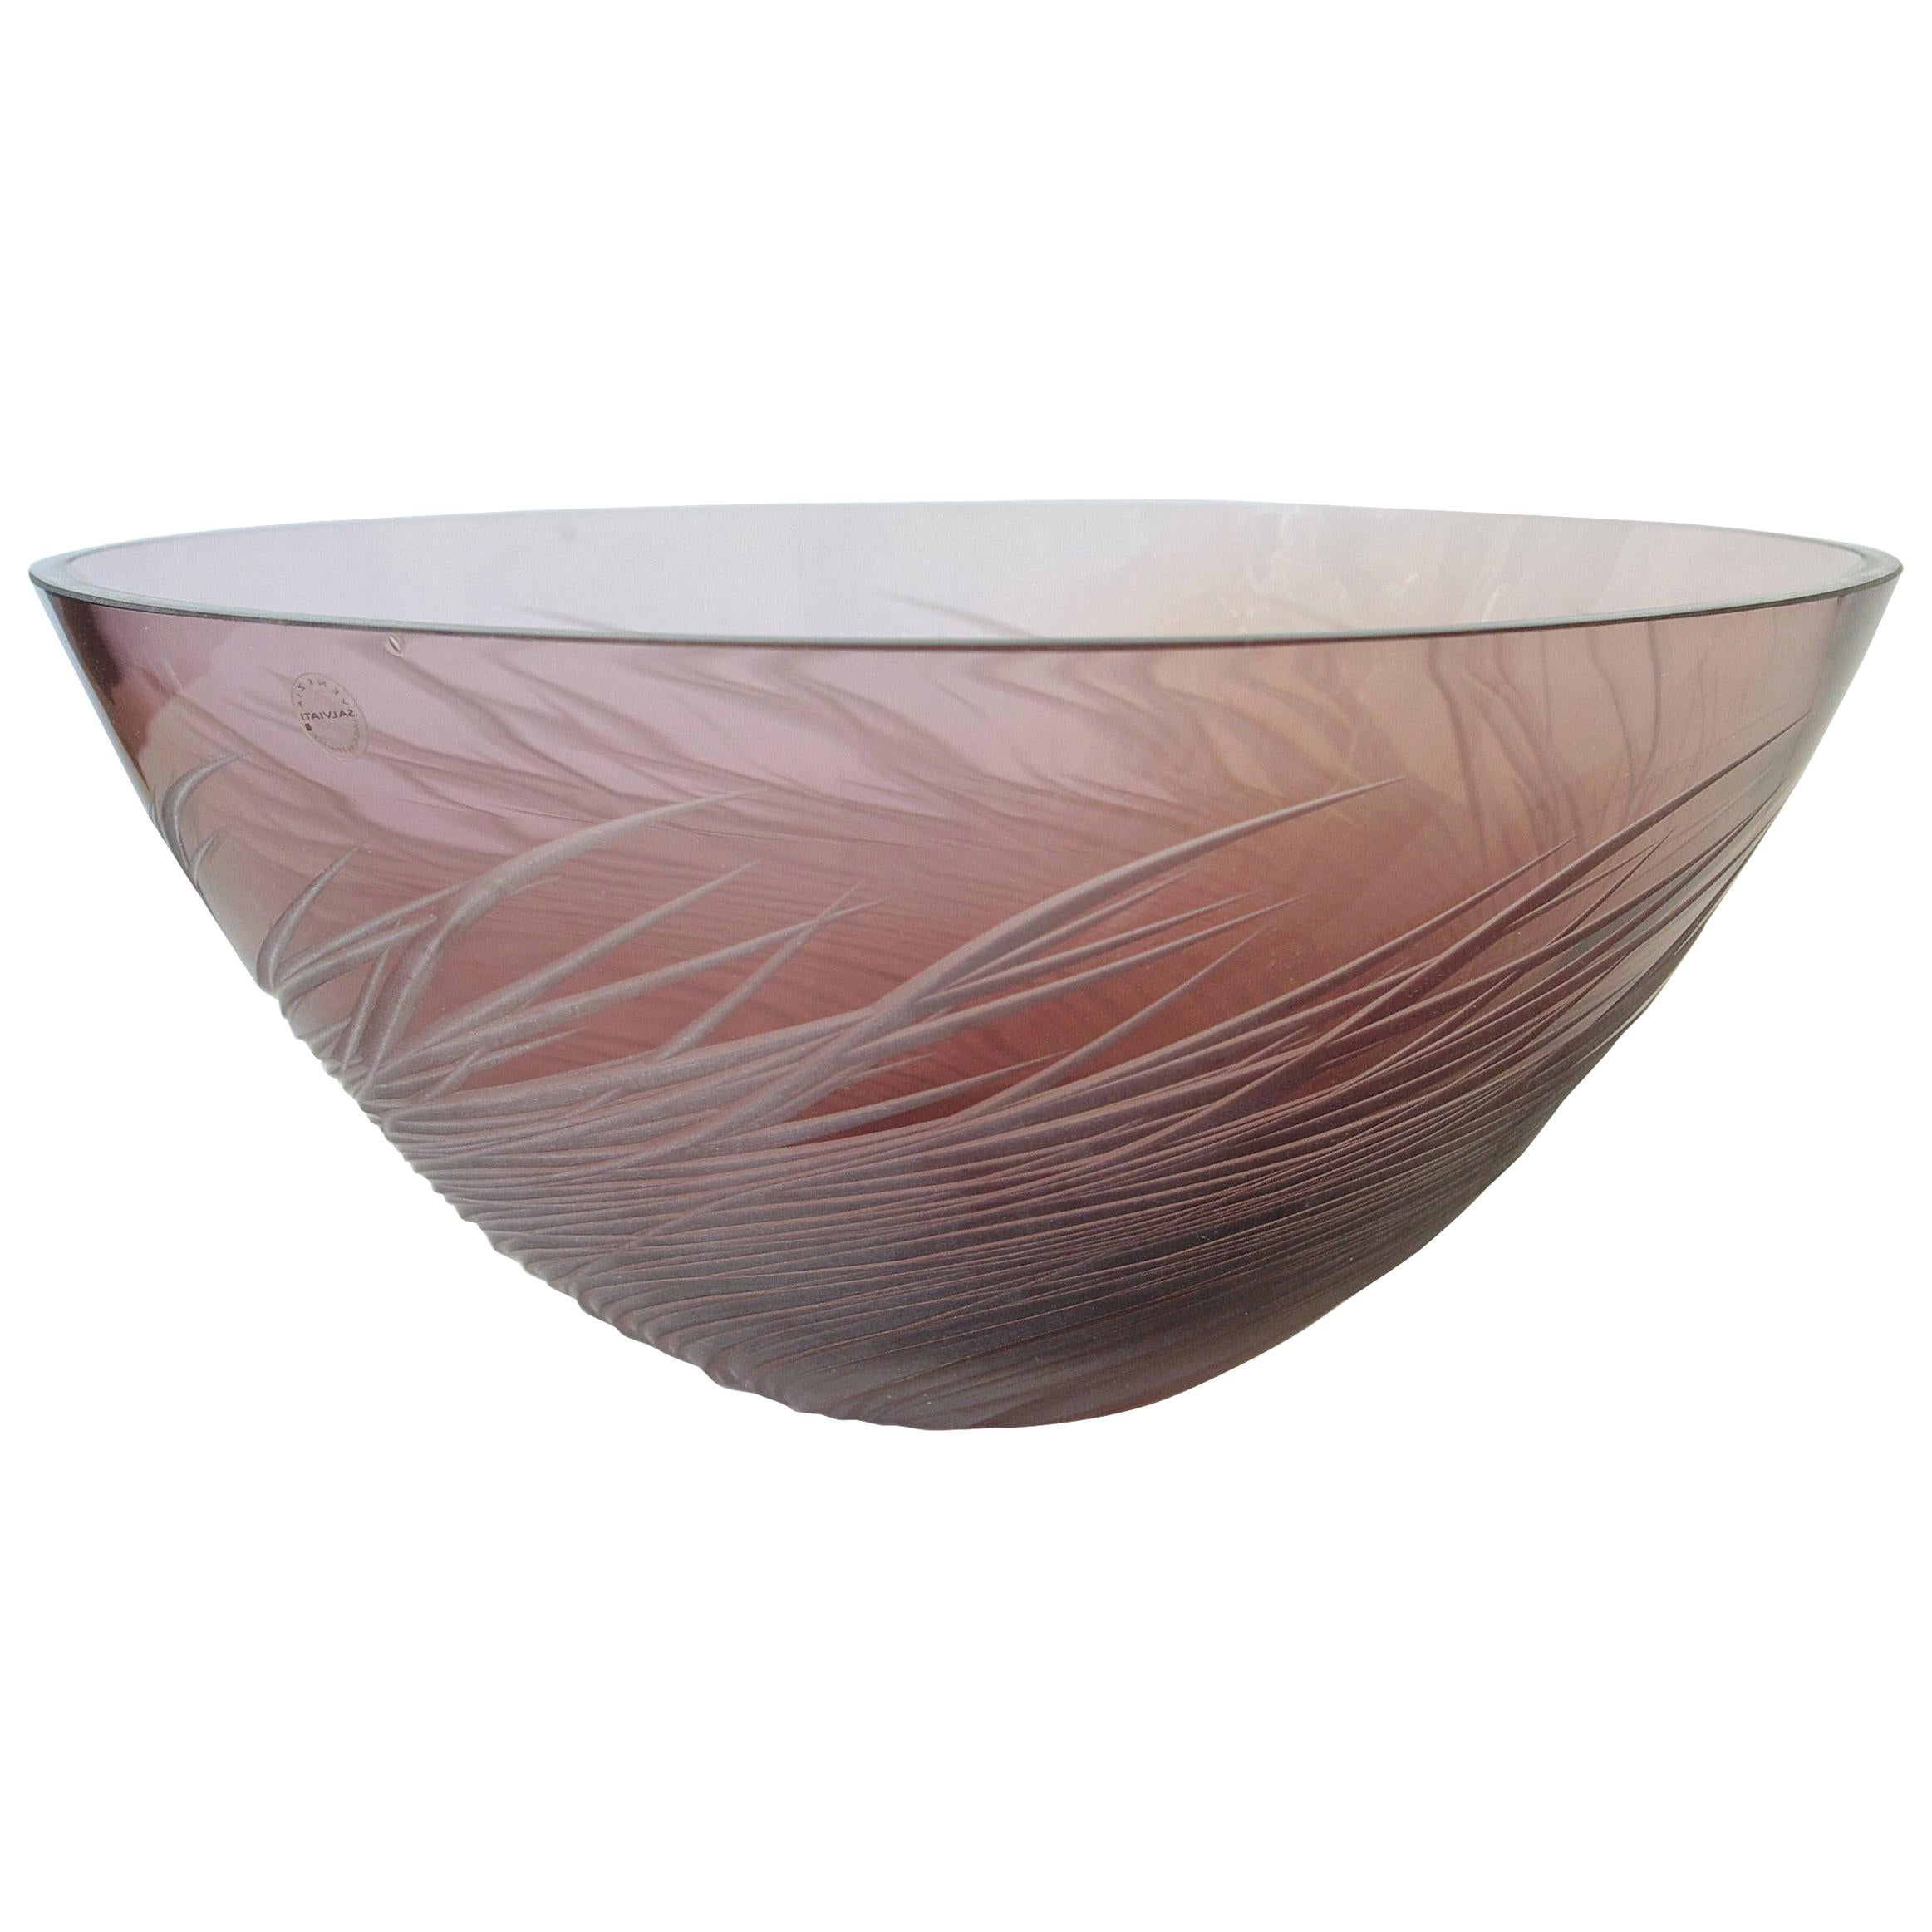 Amethyst Fruit Bowl by Salviati FINAL CLEARANCE SALE